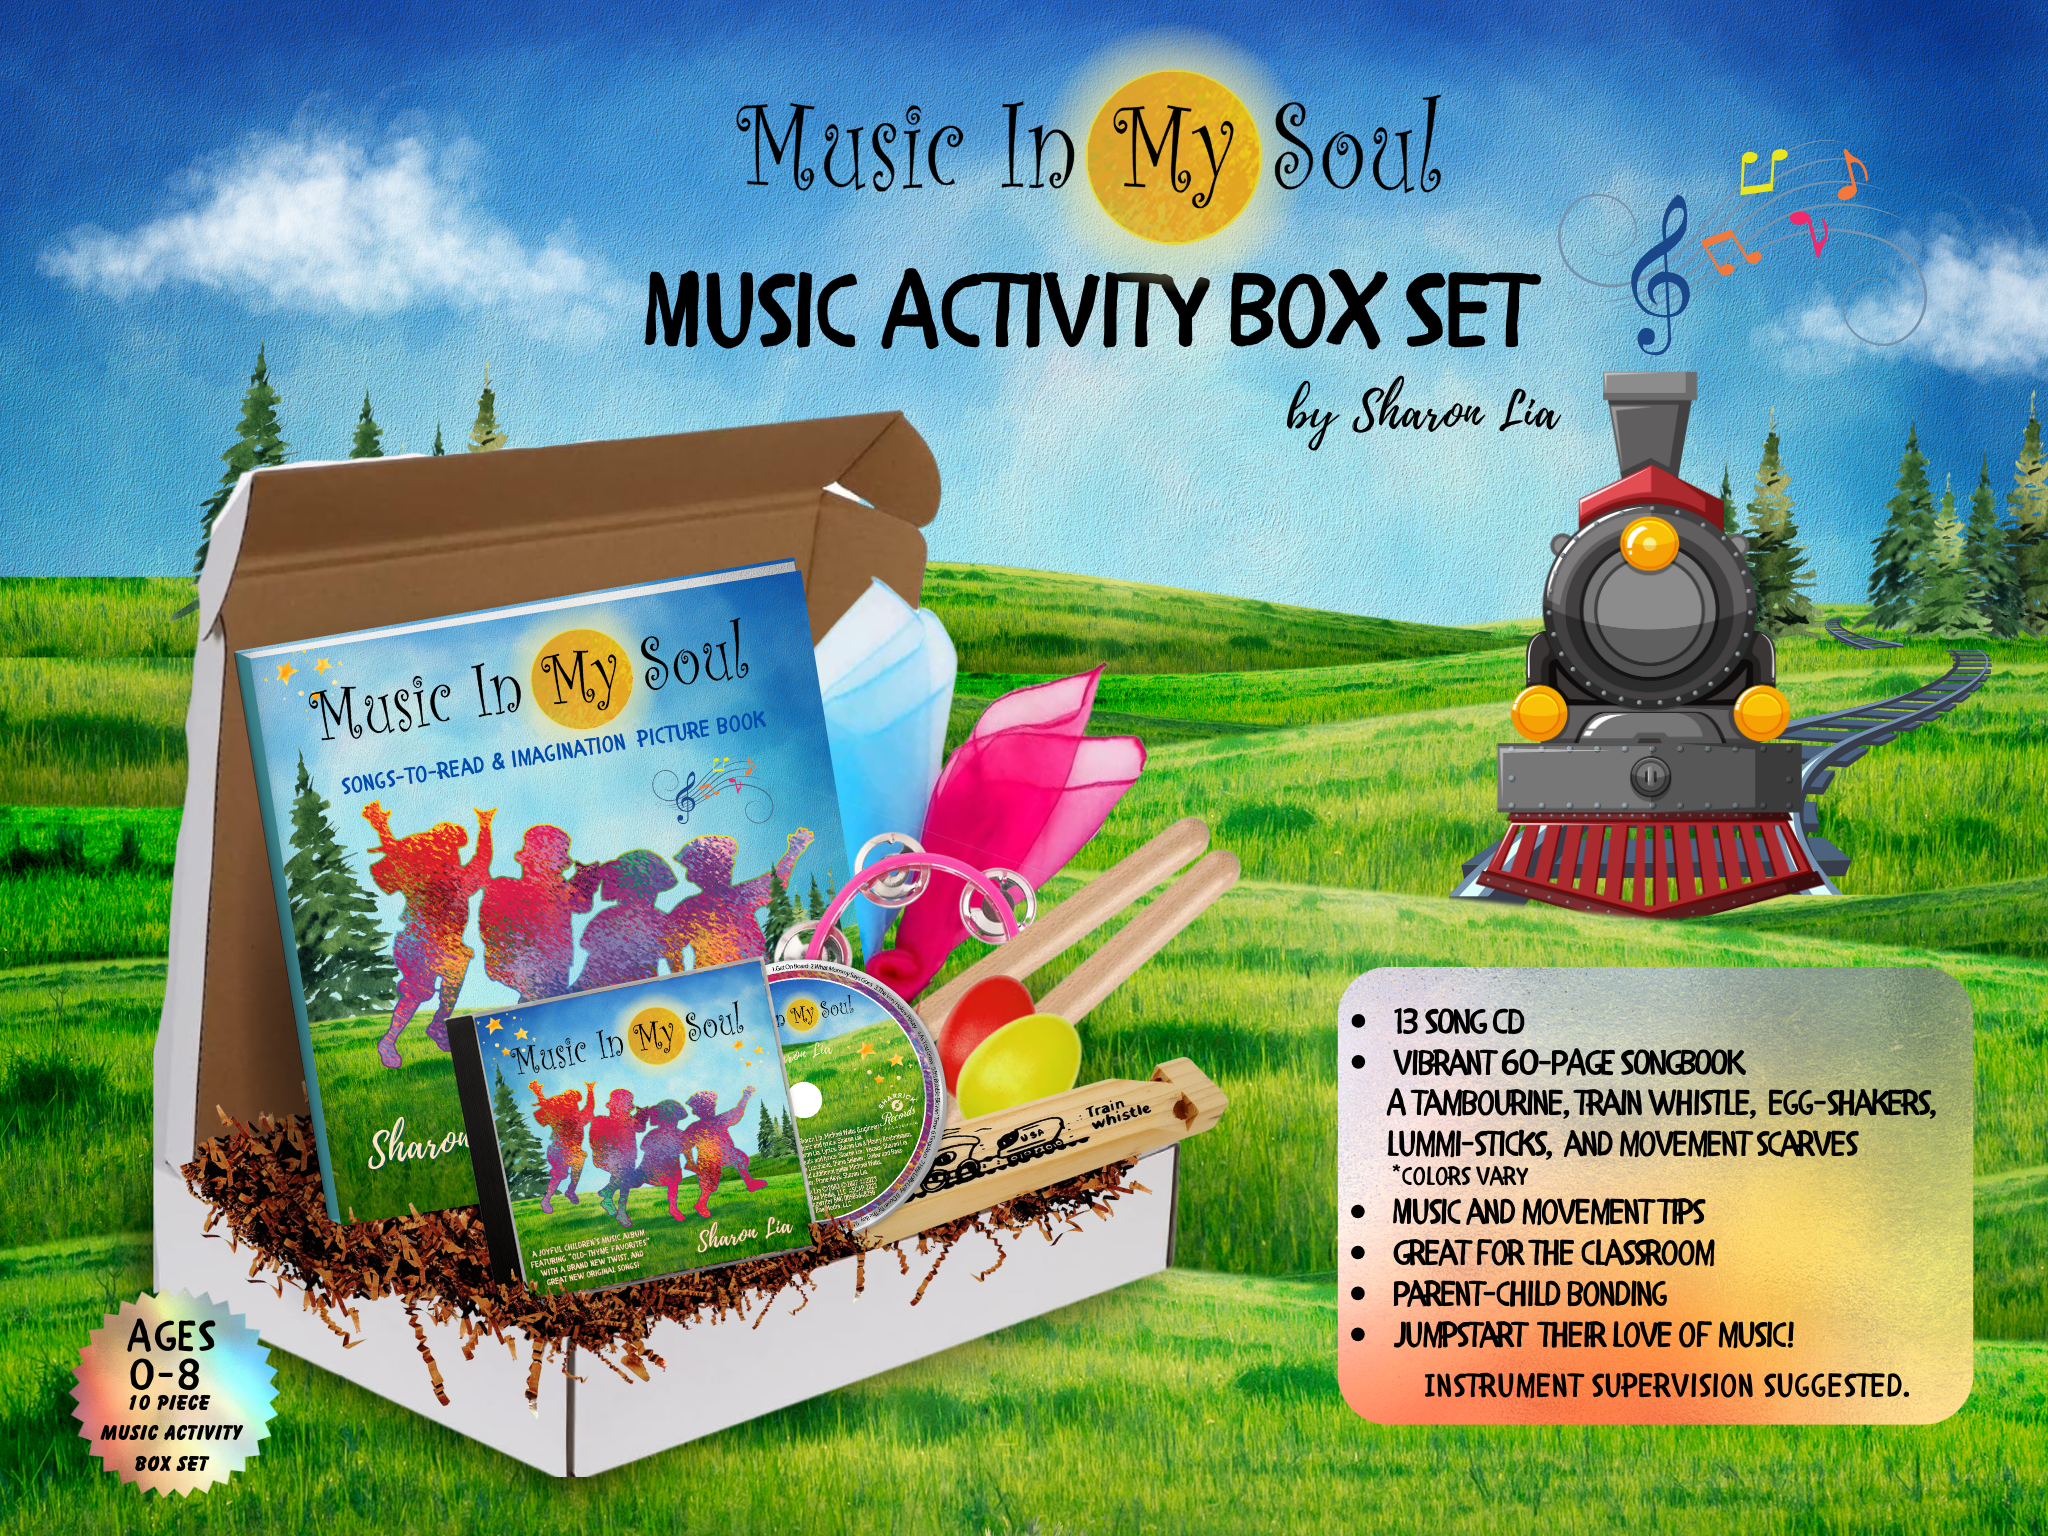 New Book and Music Box Launched!